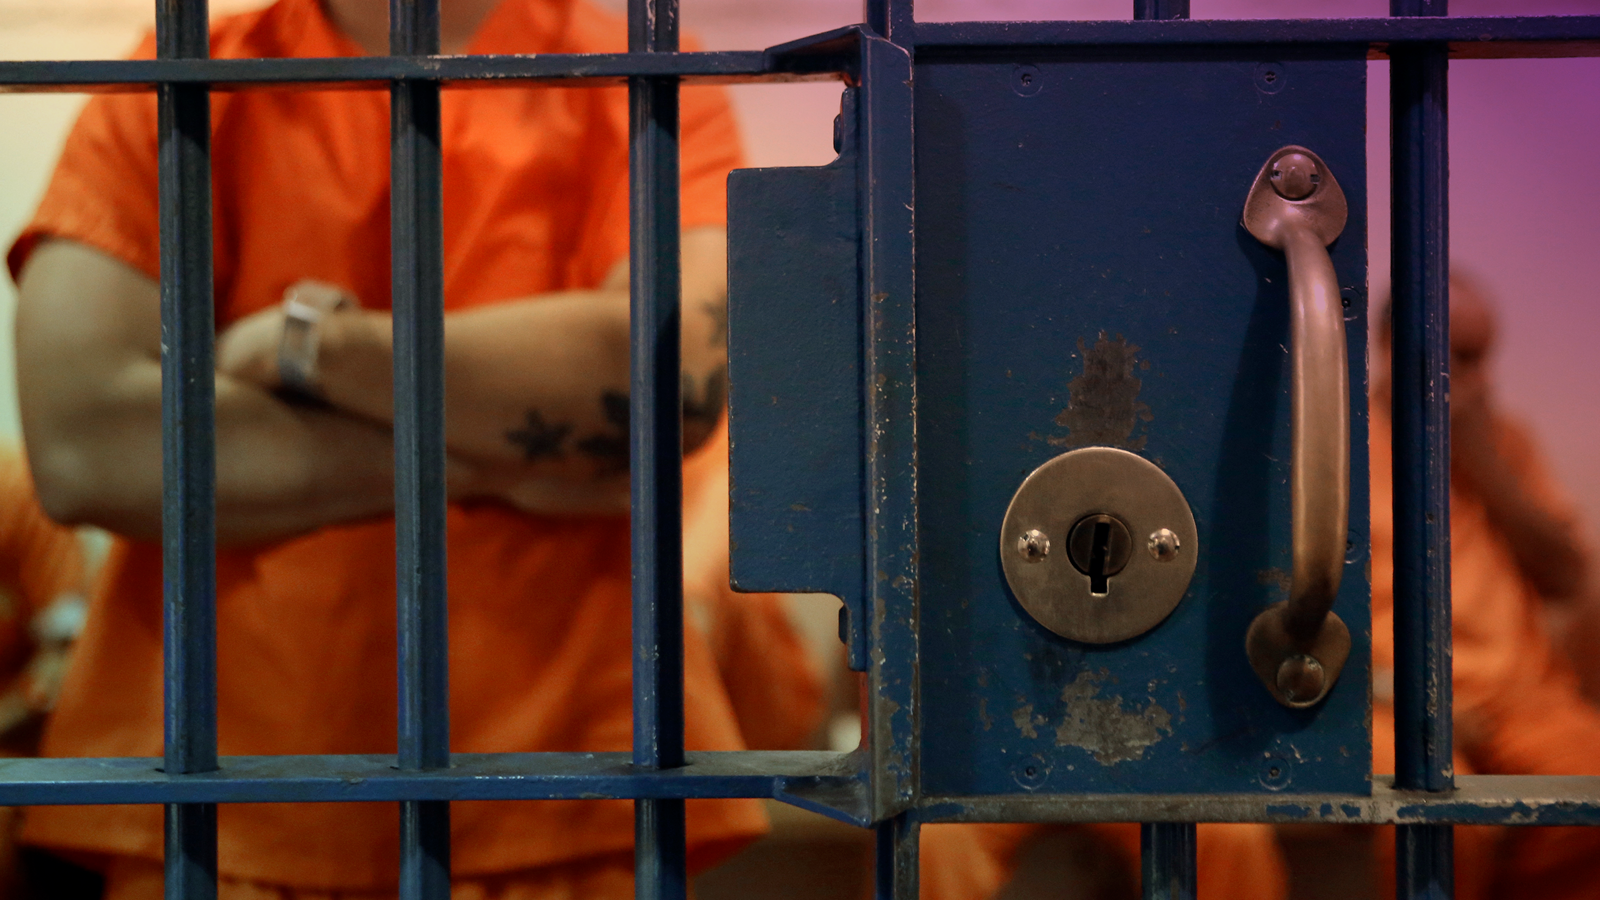 Prisoners in orange jumpsuits stand and sit in a locked holding cell.